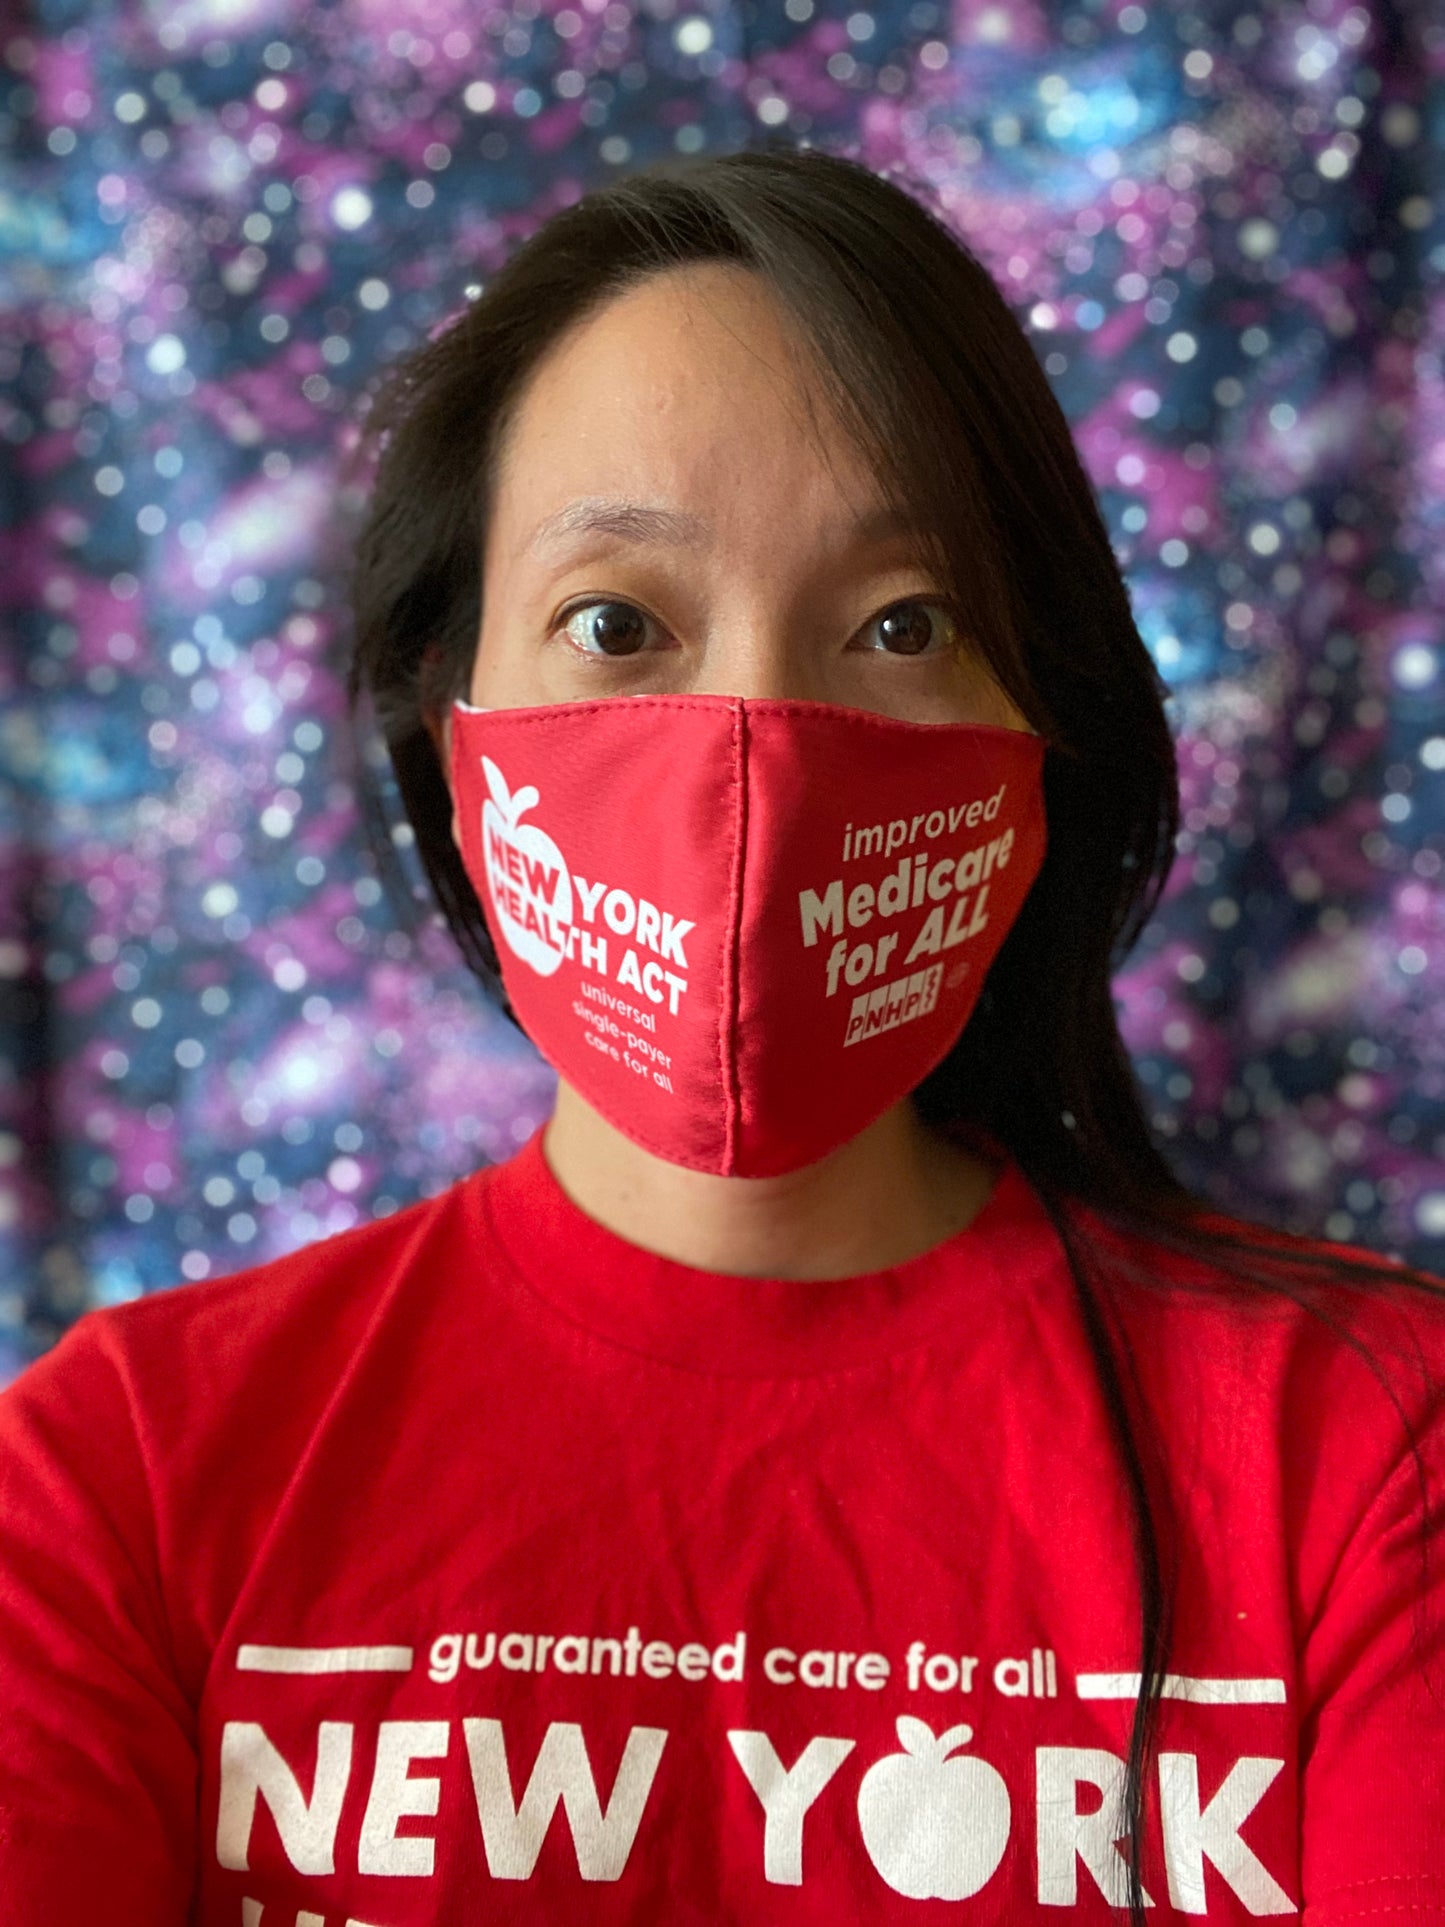 Photo of East Asian presenting  woman with long black hair and standing in front of a purple/blue/white speckled background. They are wearing a red NY Health Act face mask. The left side says "New York Health Act universal single-payer care for all" in white letters. The right side says "improved Medicare for All" in white letters and has the PNHP logo and union bug at bottom. 